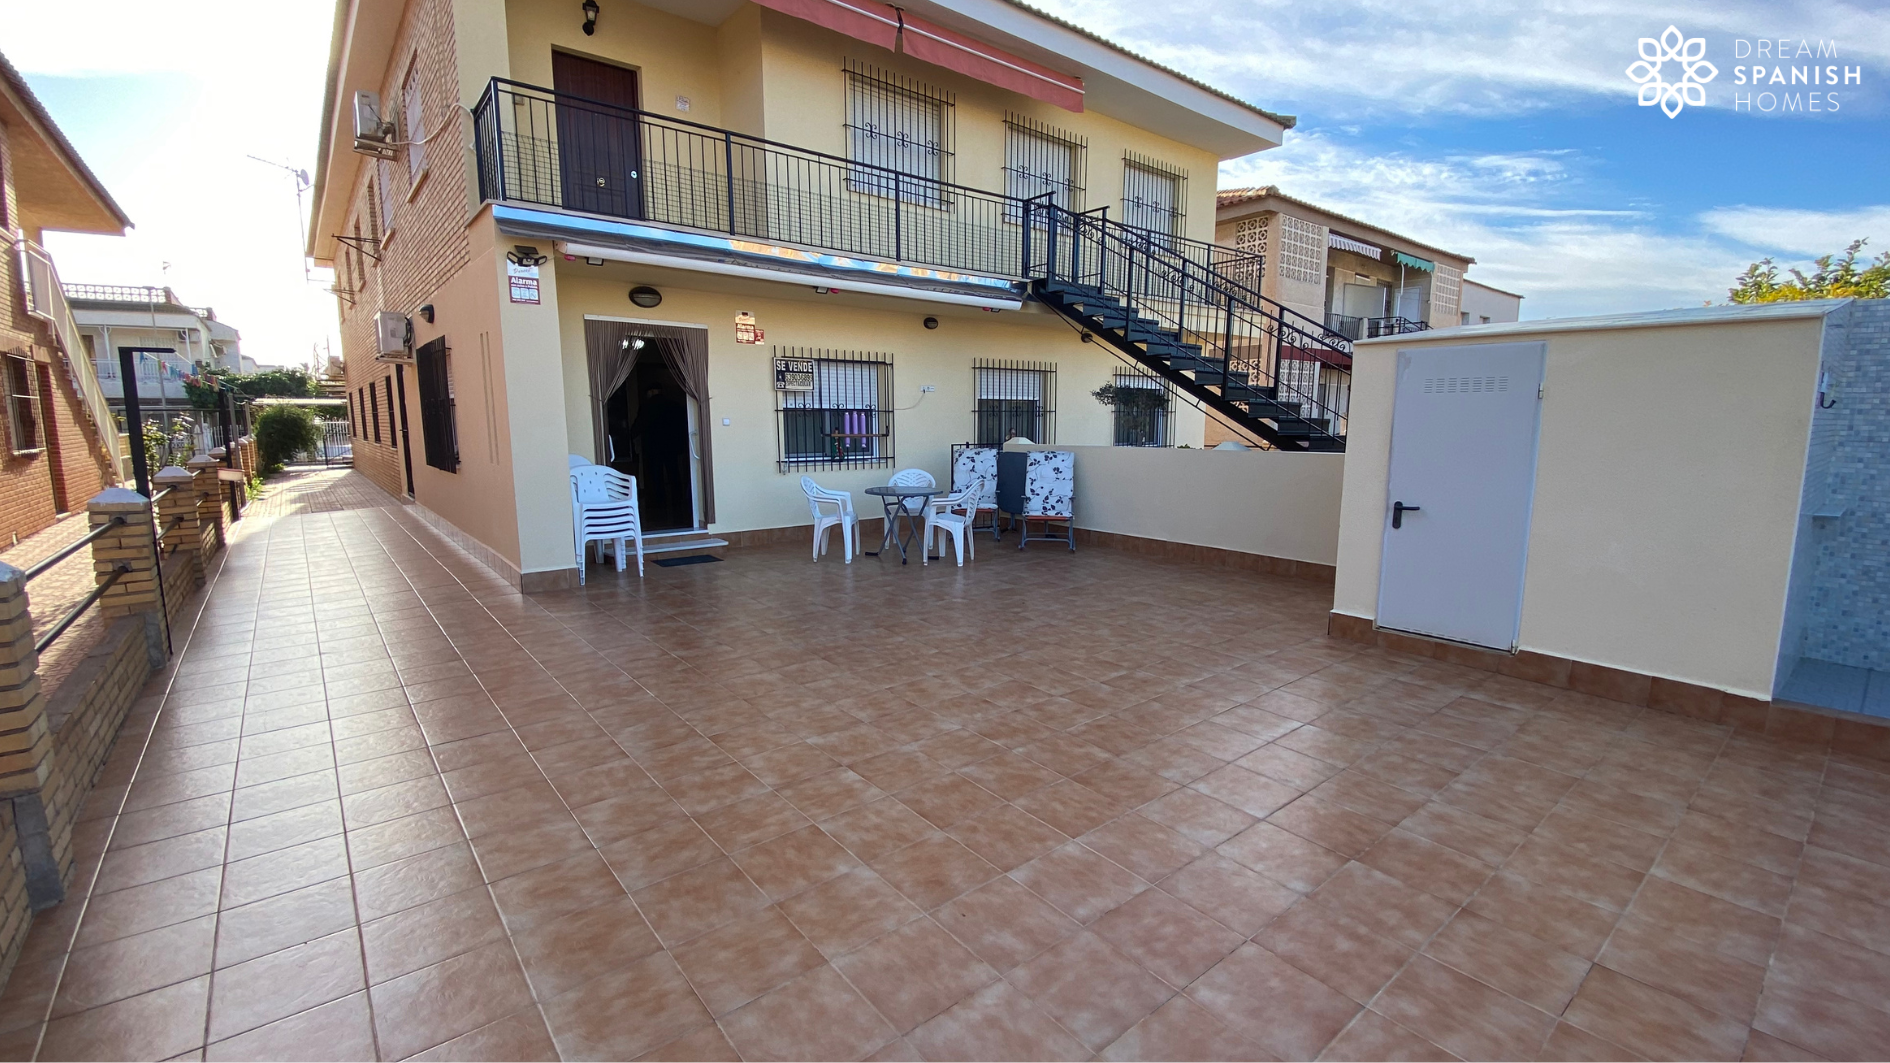 Los Alcazares - 3 Bed Ground Floor Apartment 150mtr from the beach (C) 12